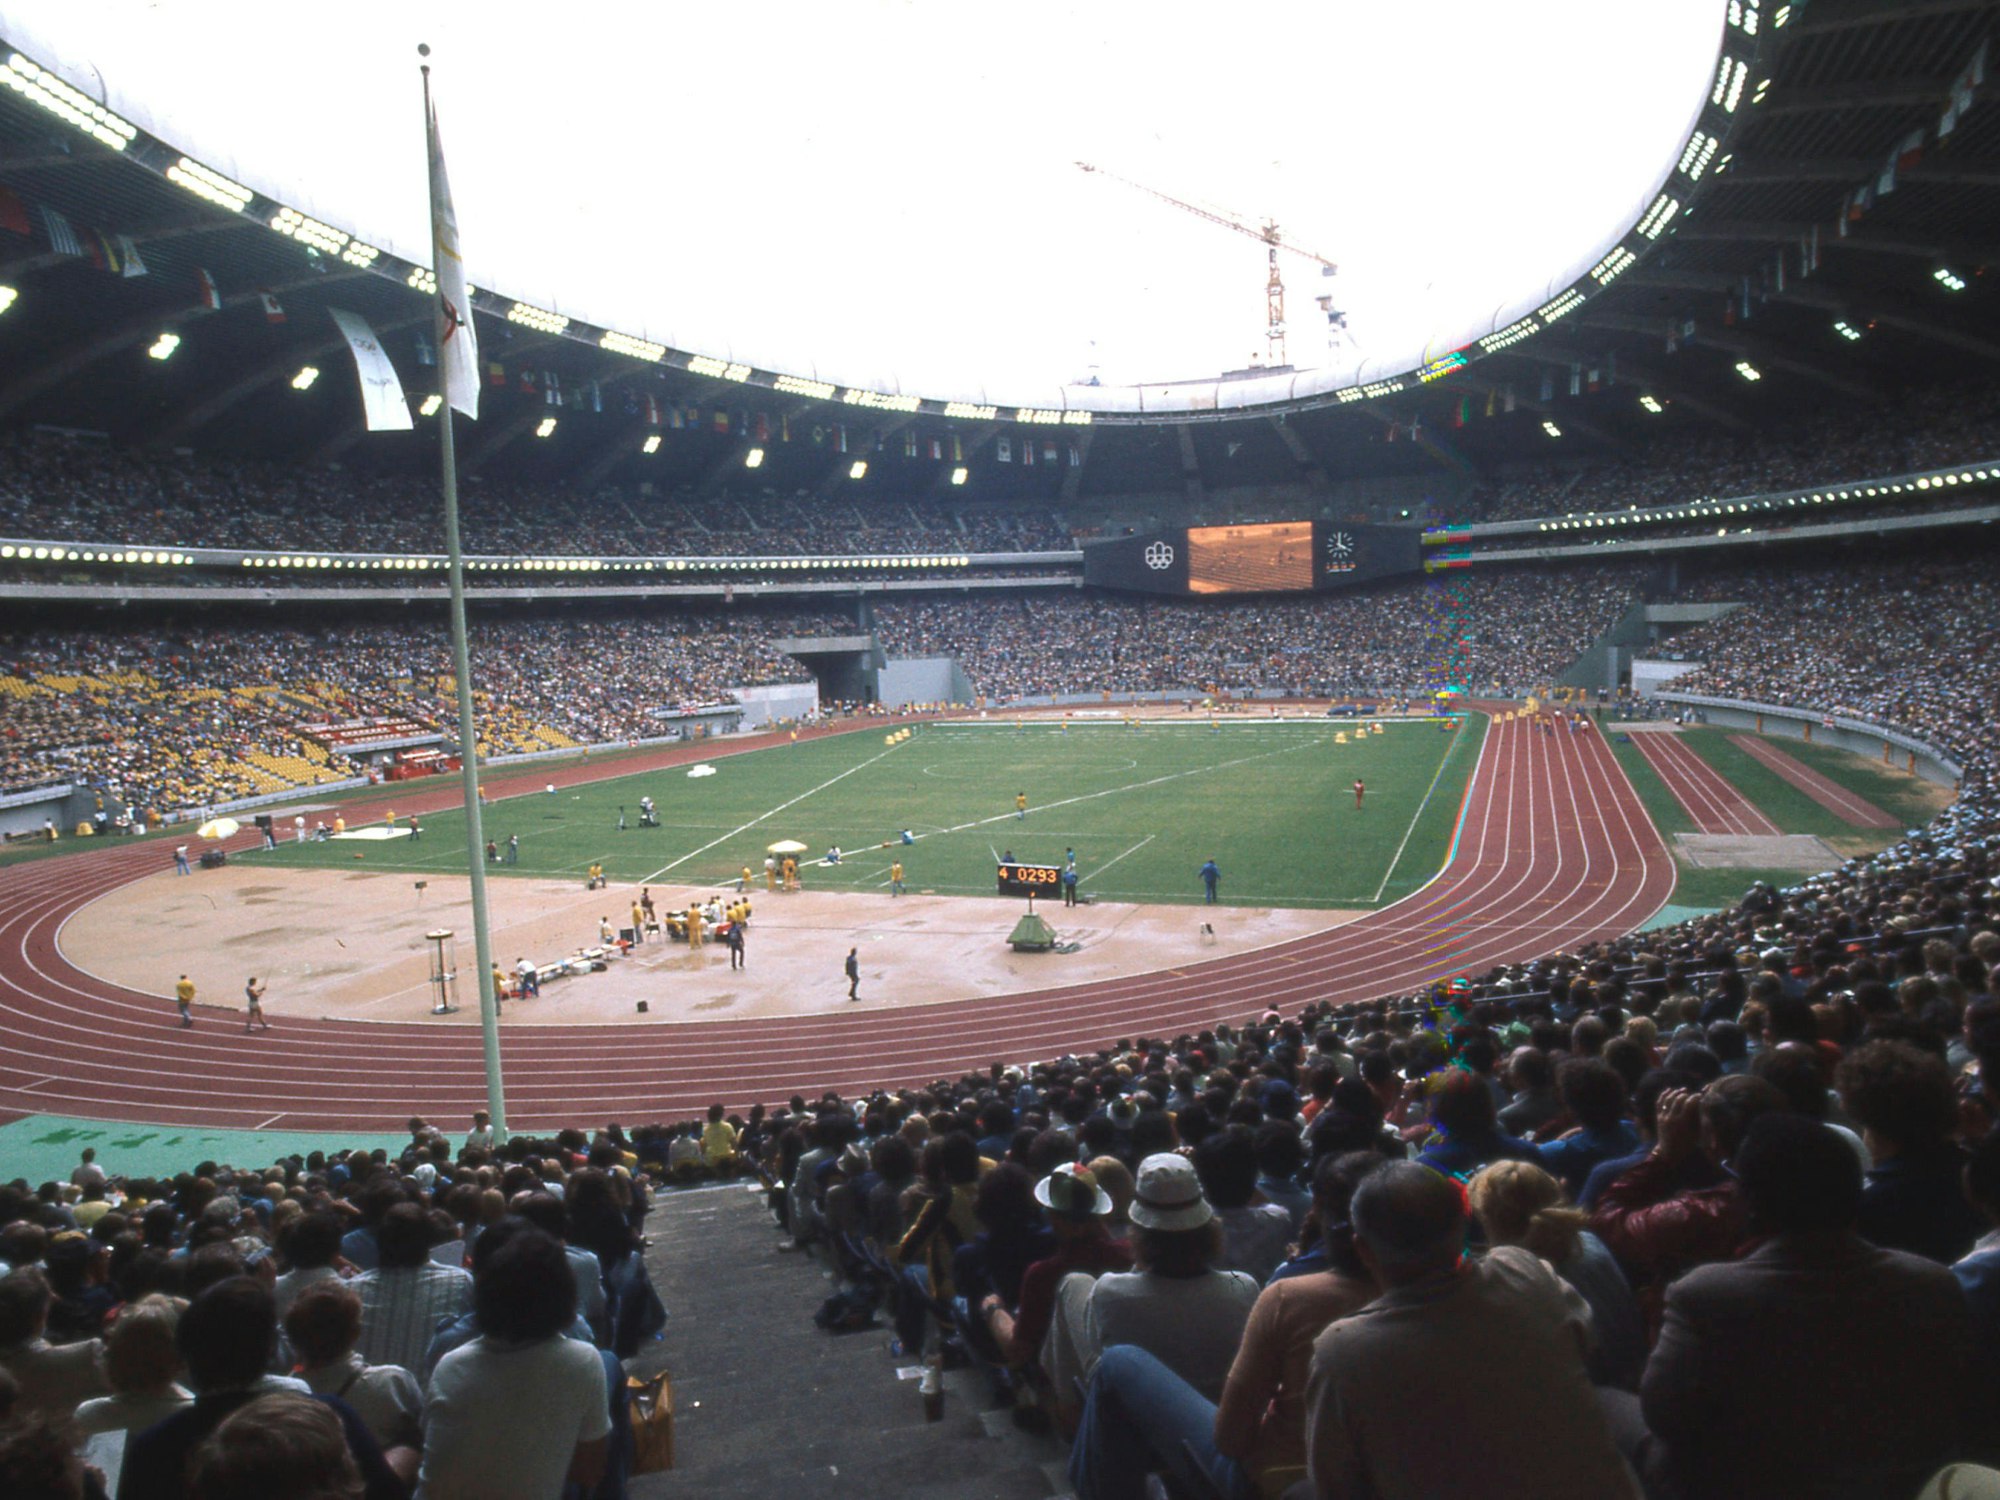 Das Olympiastadion in Montreal